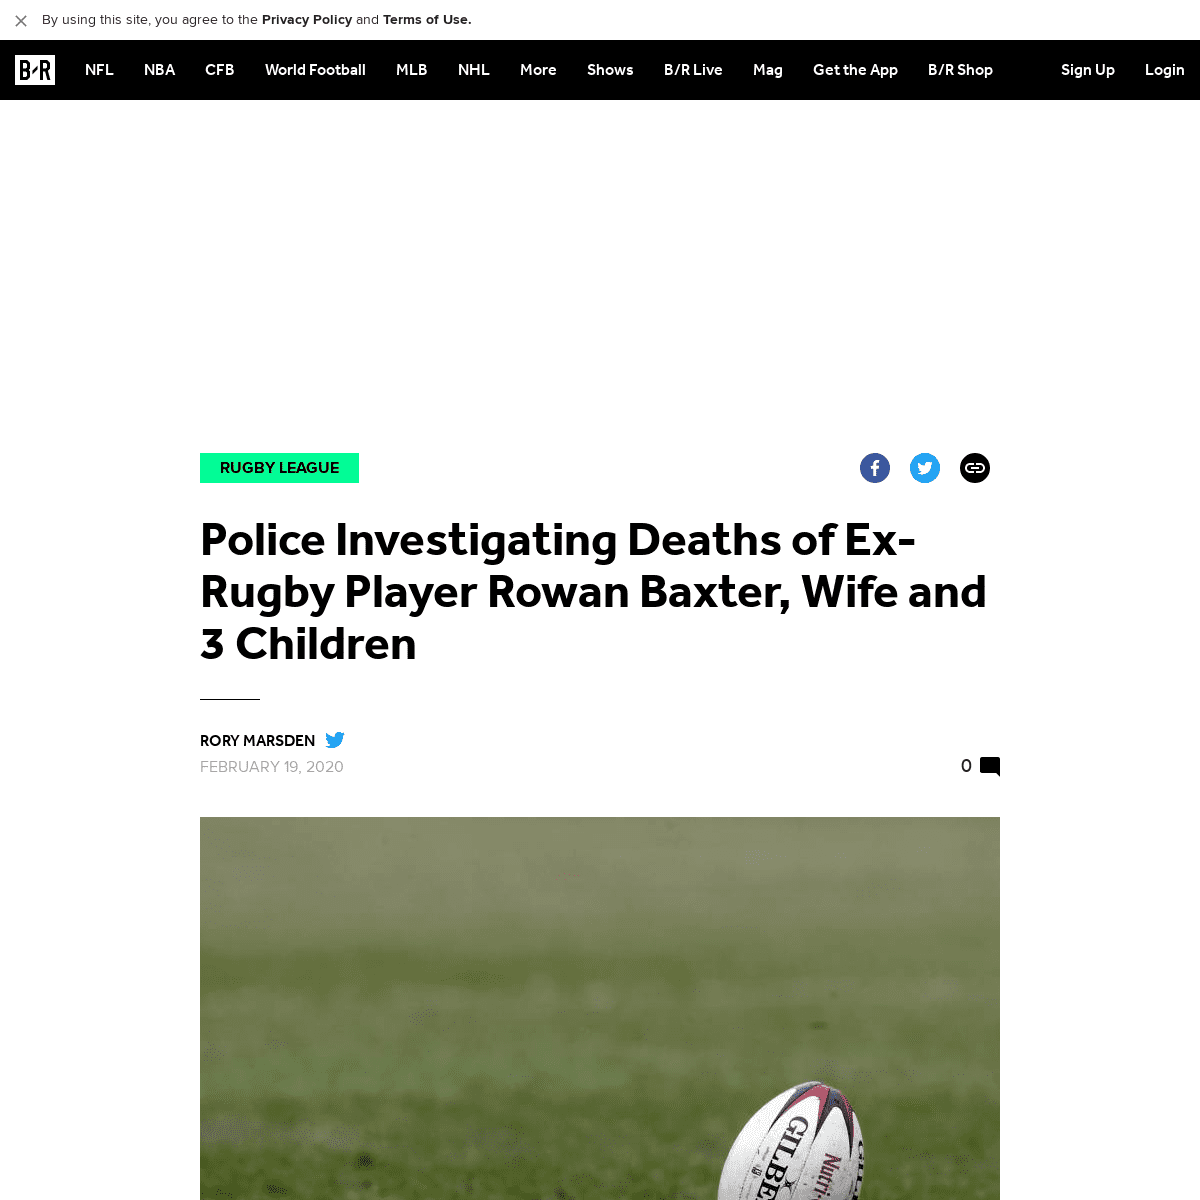 A complete backup of bleacherreport.com/articles/2877040-police-investigating-deaths-of-ex-rugby-player-rowan-baxter-wife-and-3-